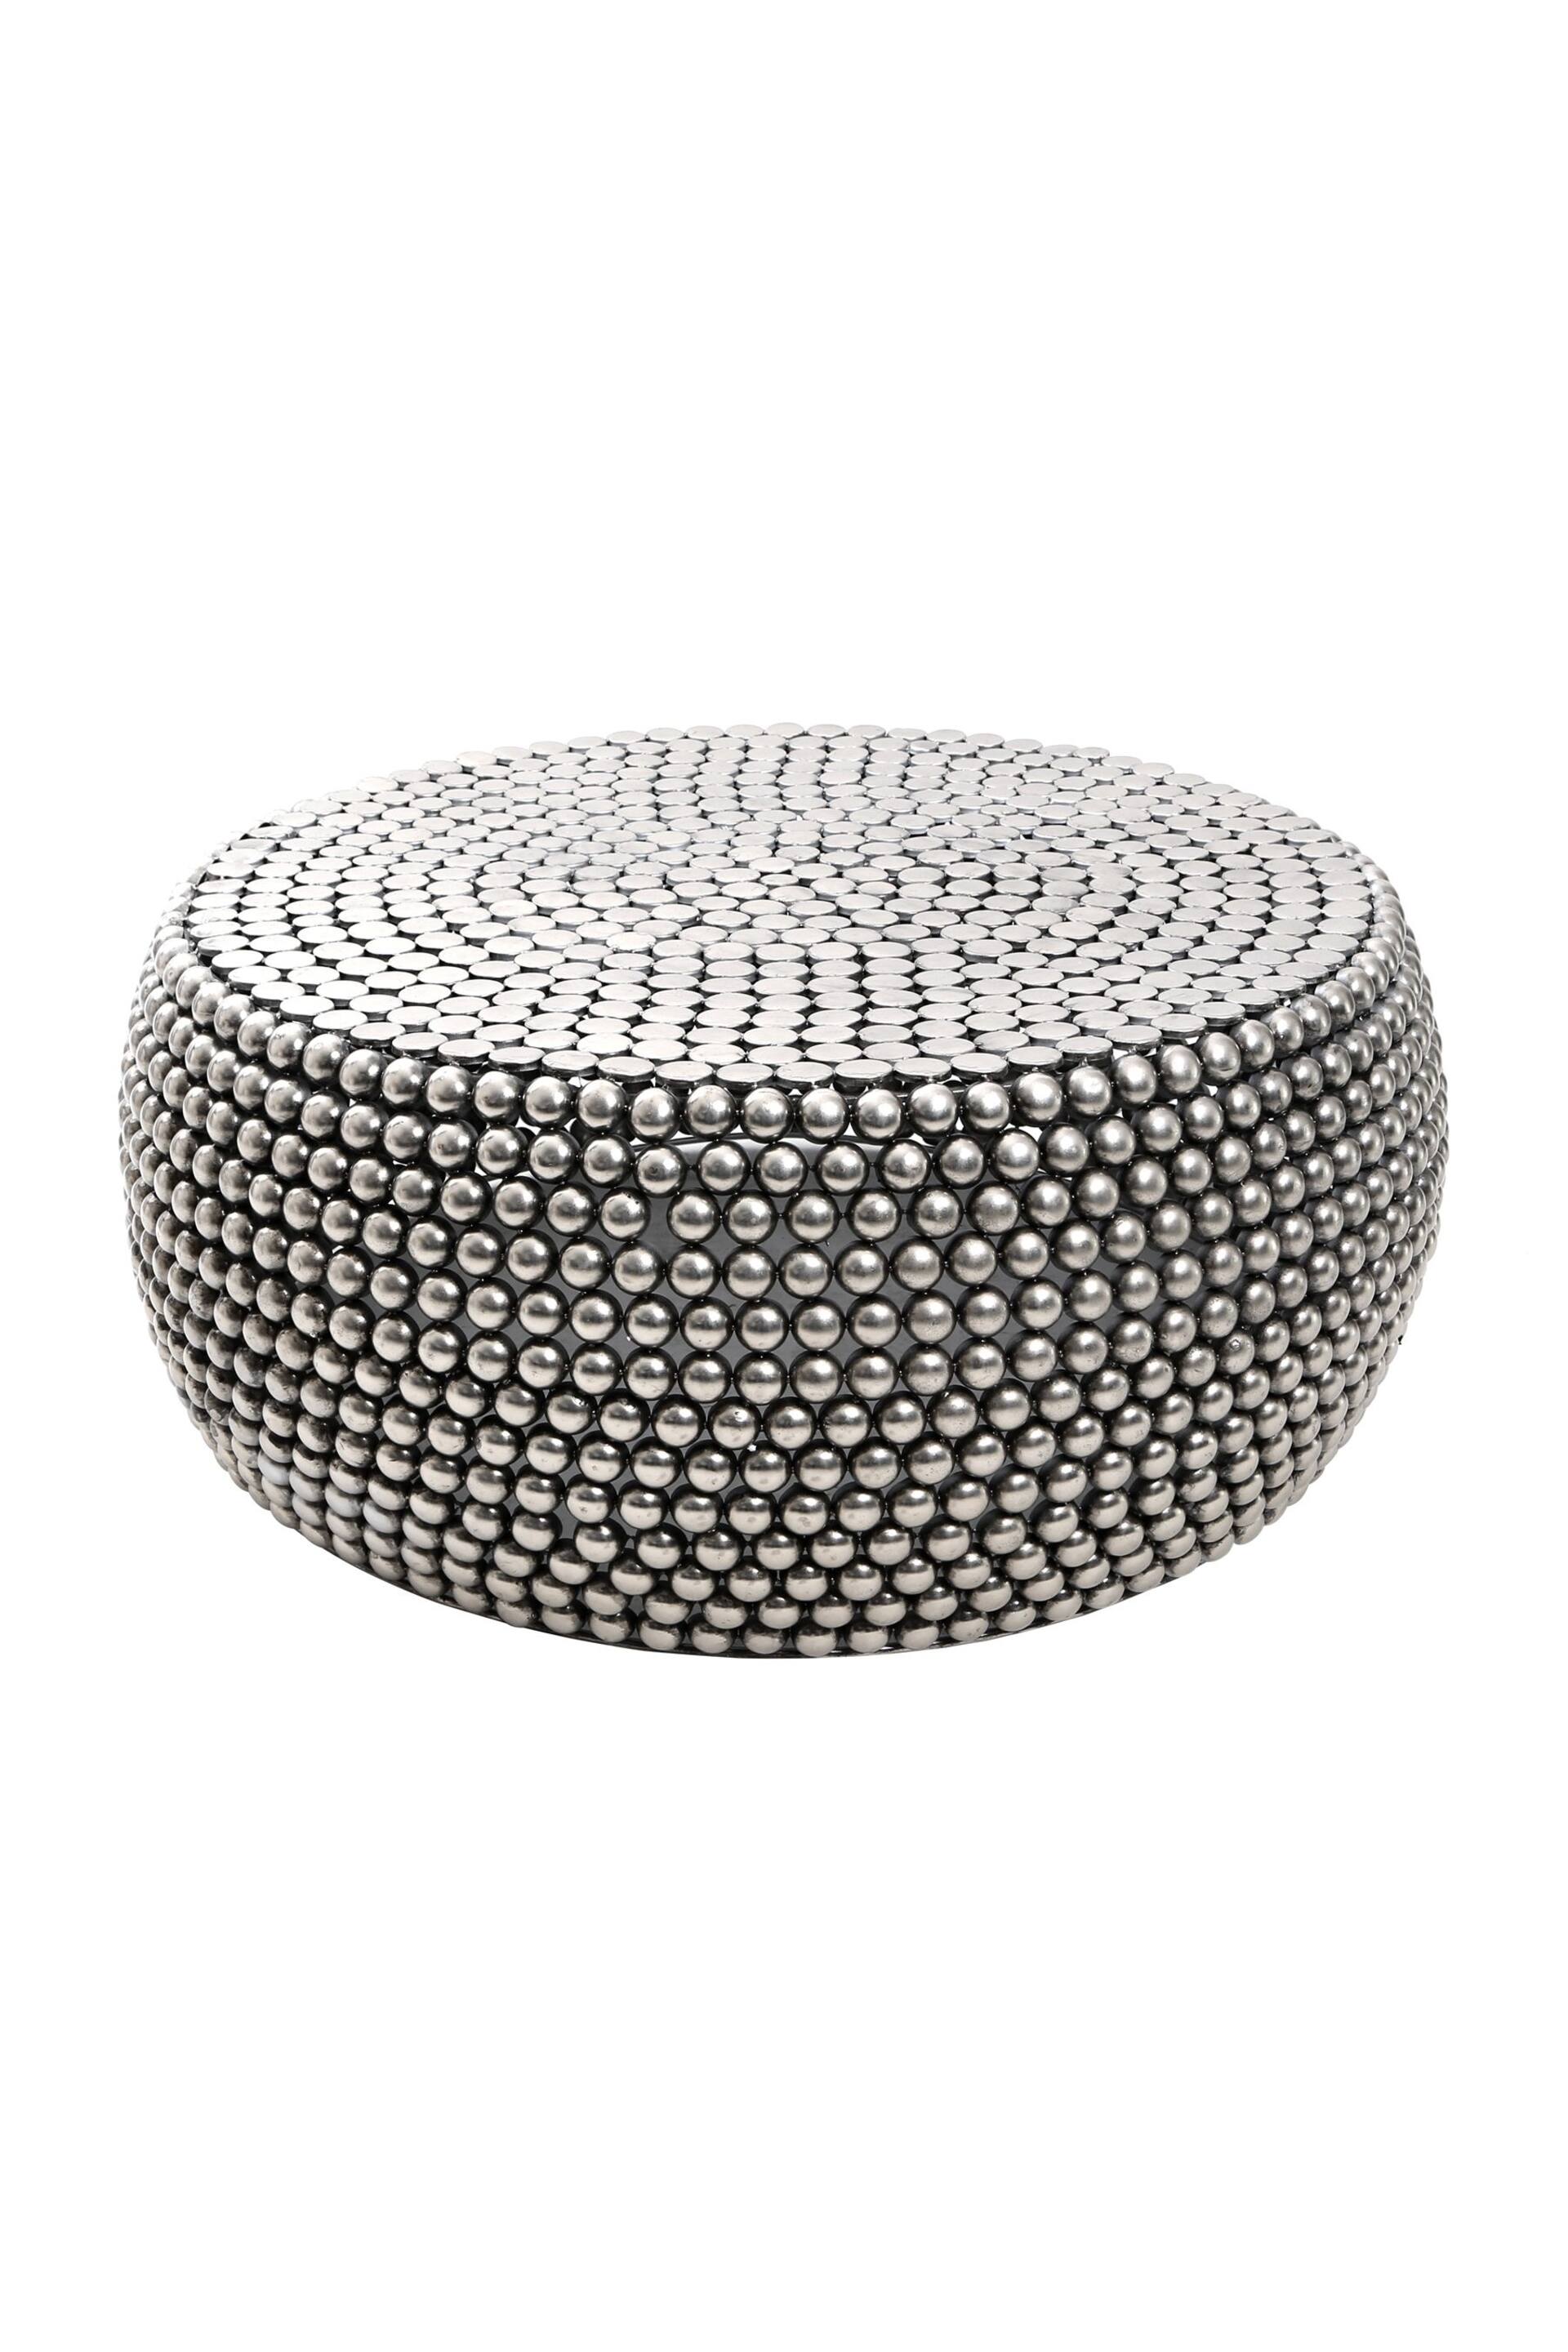 Fifty Five South Silver Templar Beaded Iron Coffee Table - Image 2 of 4